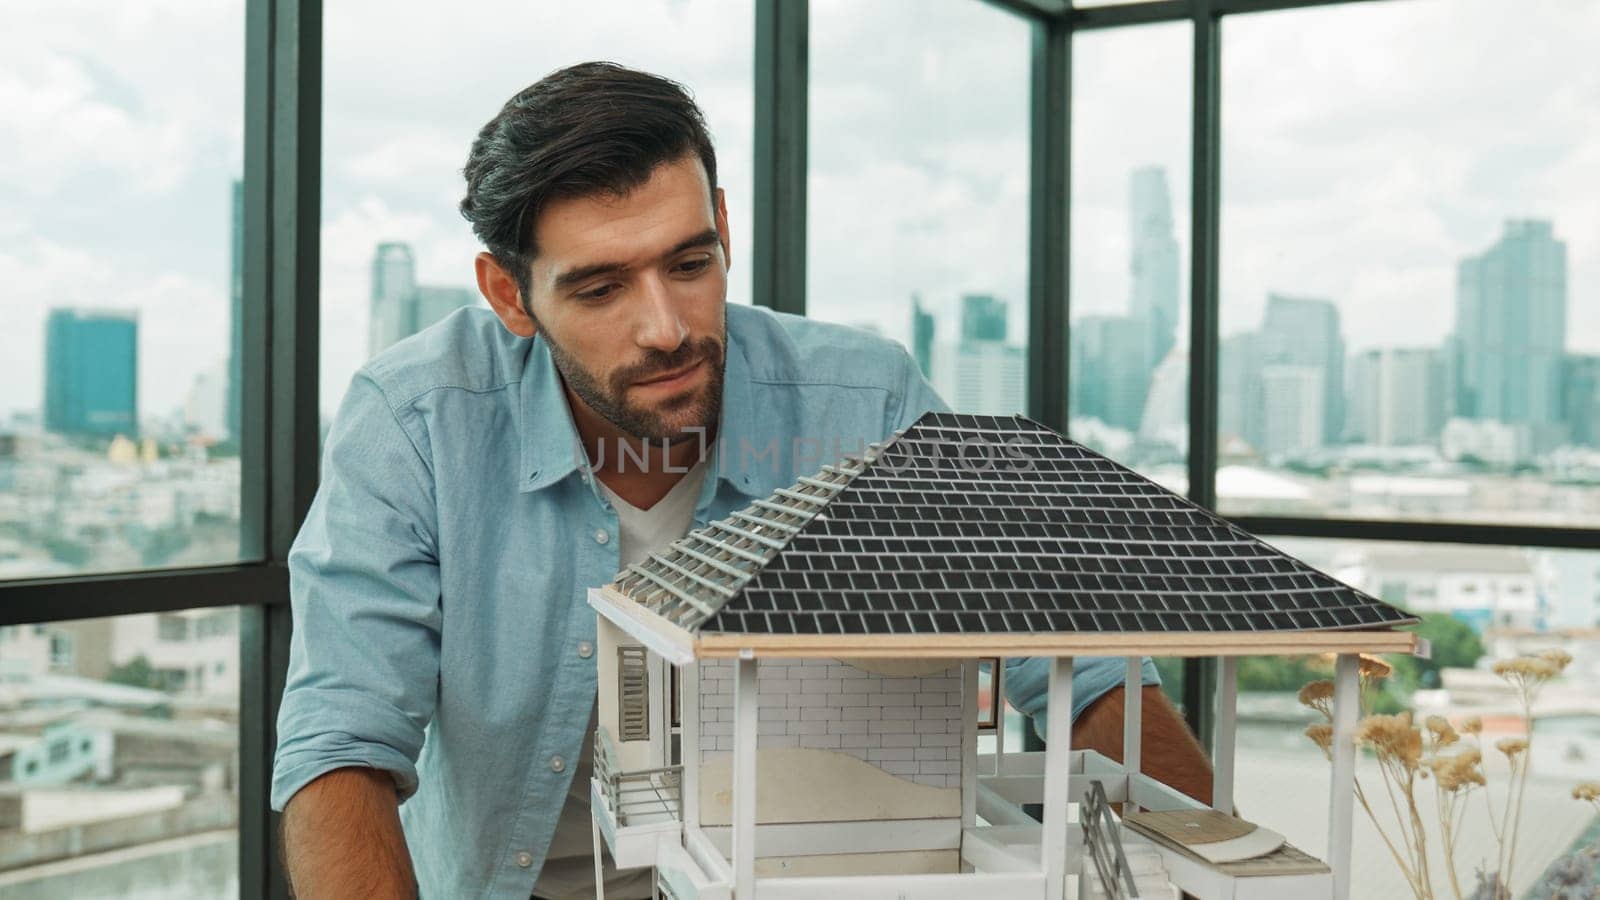 Professional architect engineer check, inspect, look architectural model at modern office with skyscraper, cityscape view. Skilled project manager or businessman check house construction. Tracery